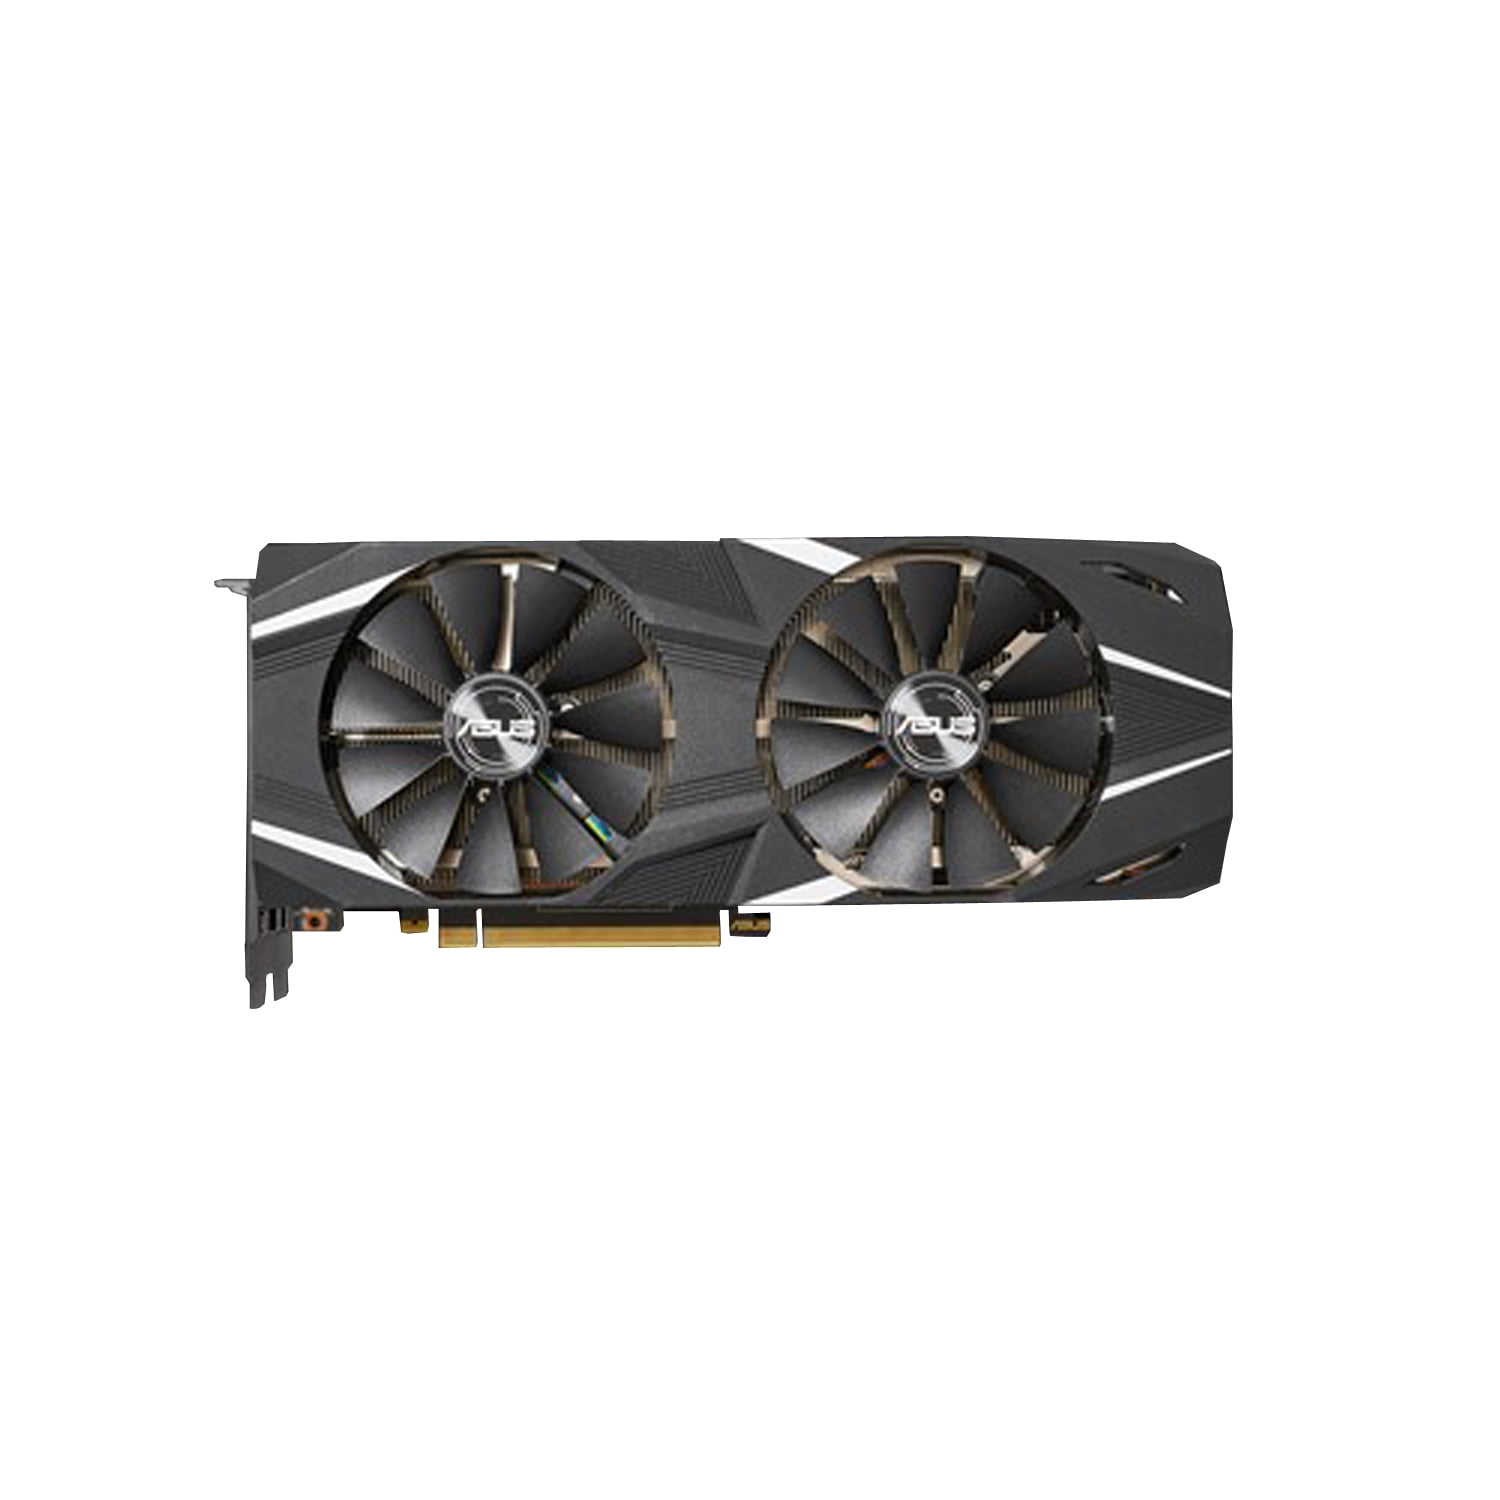 færge onsdag maternal Asus Dual DUAL-RTX2080TI-O11G GeForce RTX 2080 Ti Graphic Card - 11 GB  GDDR6 - Triple Slot Space Required - Walmart.com